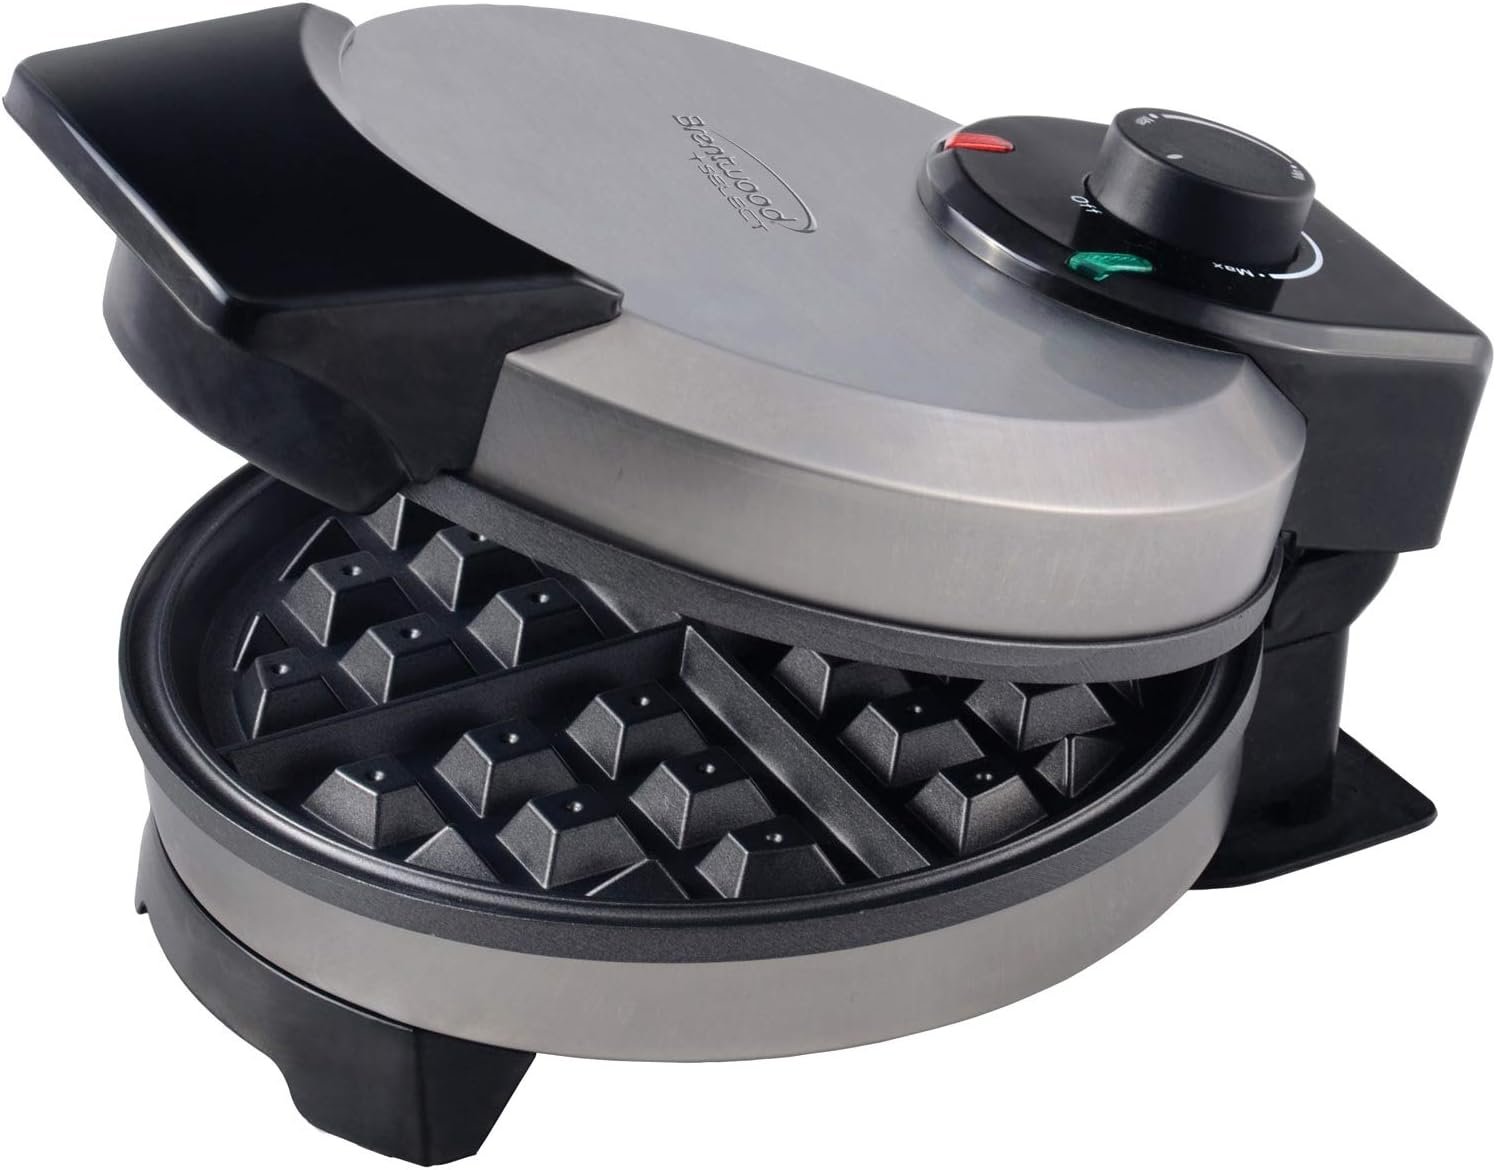 Brentwood Waffle Maker Review